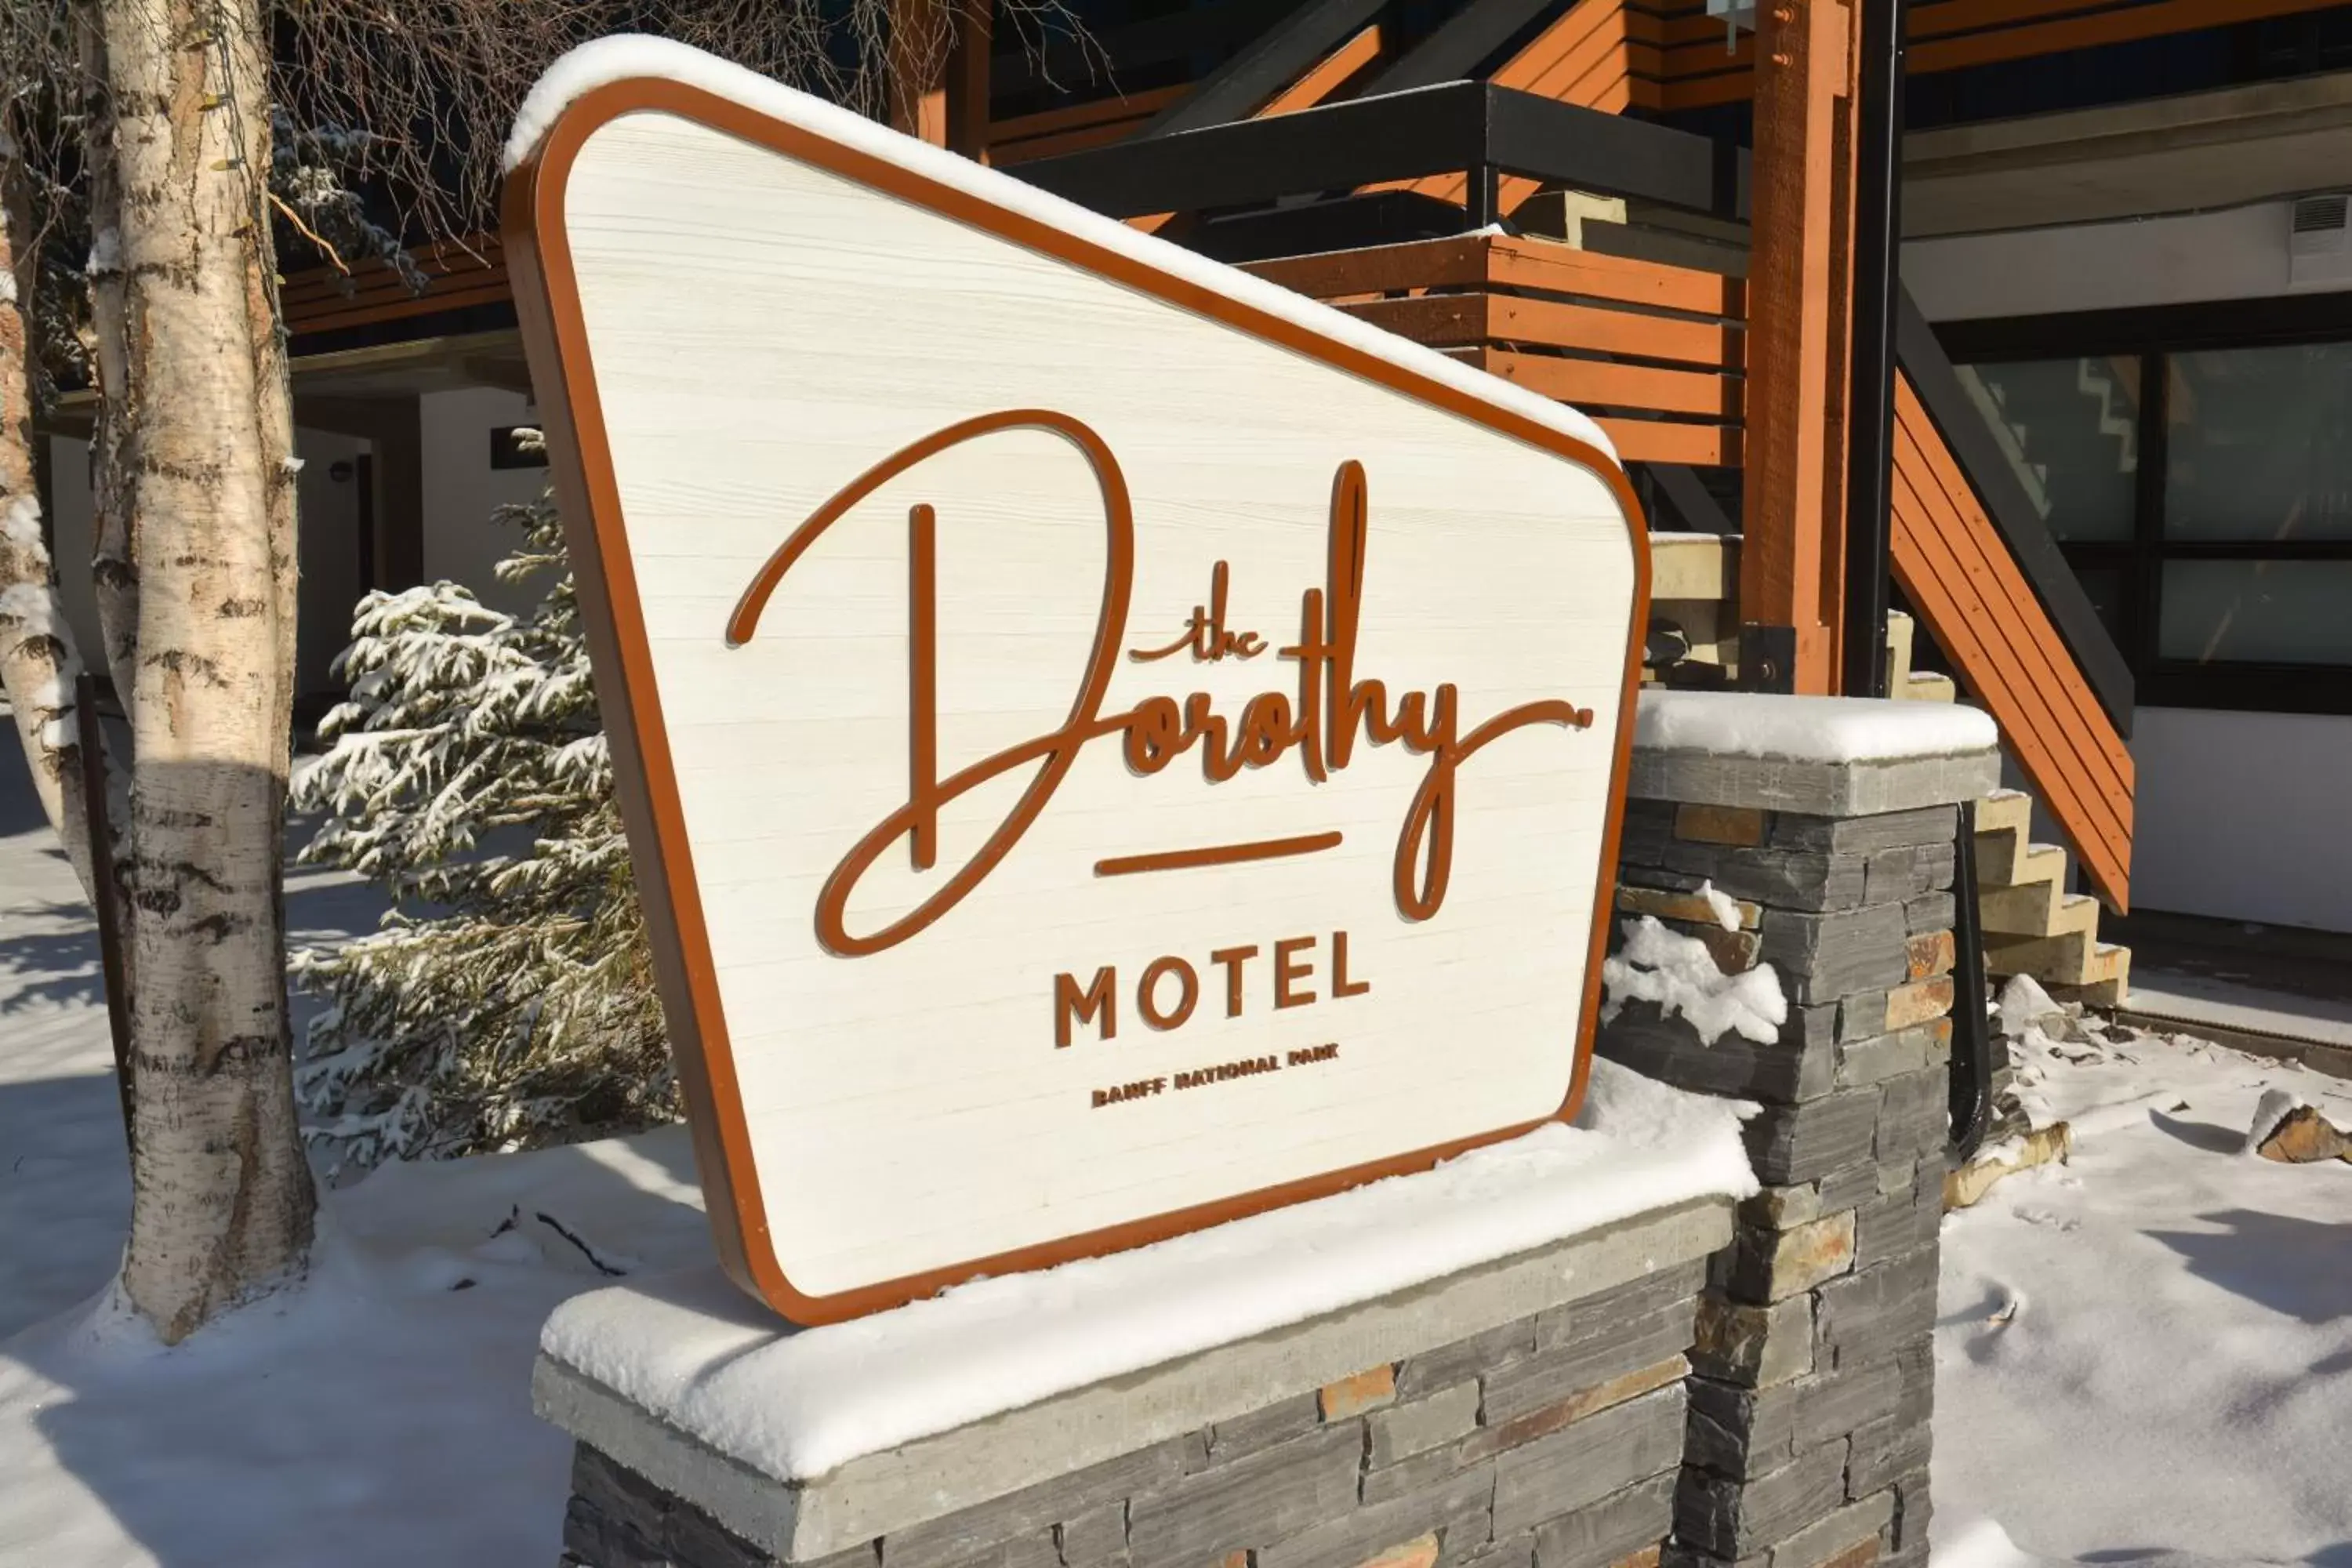 Property building in The Dorothy Motel